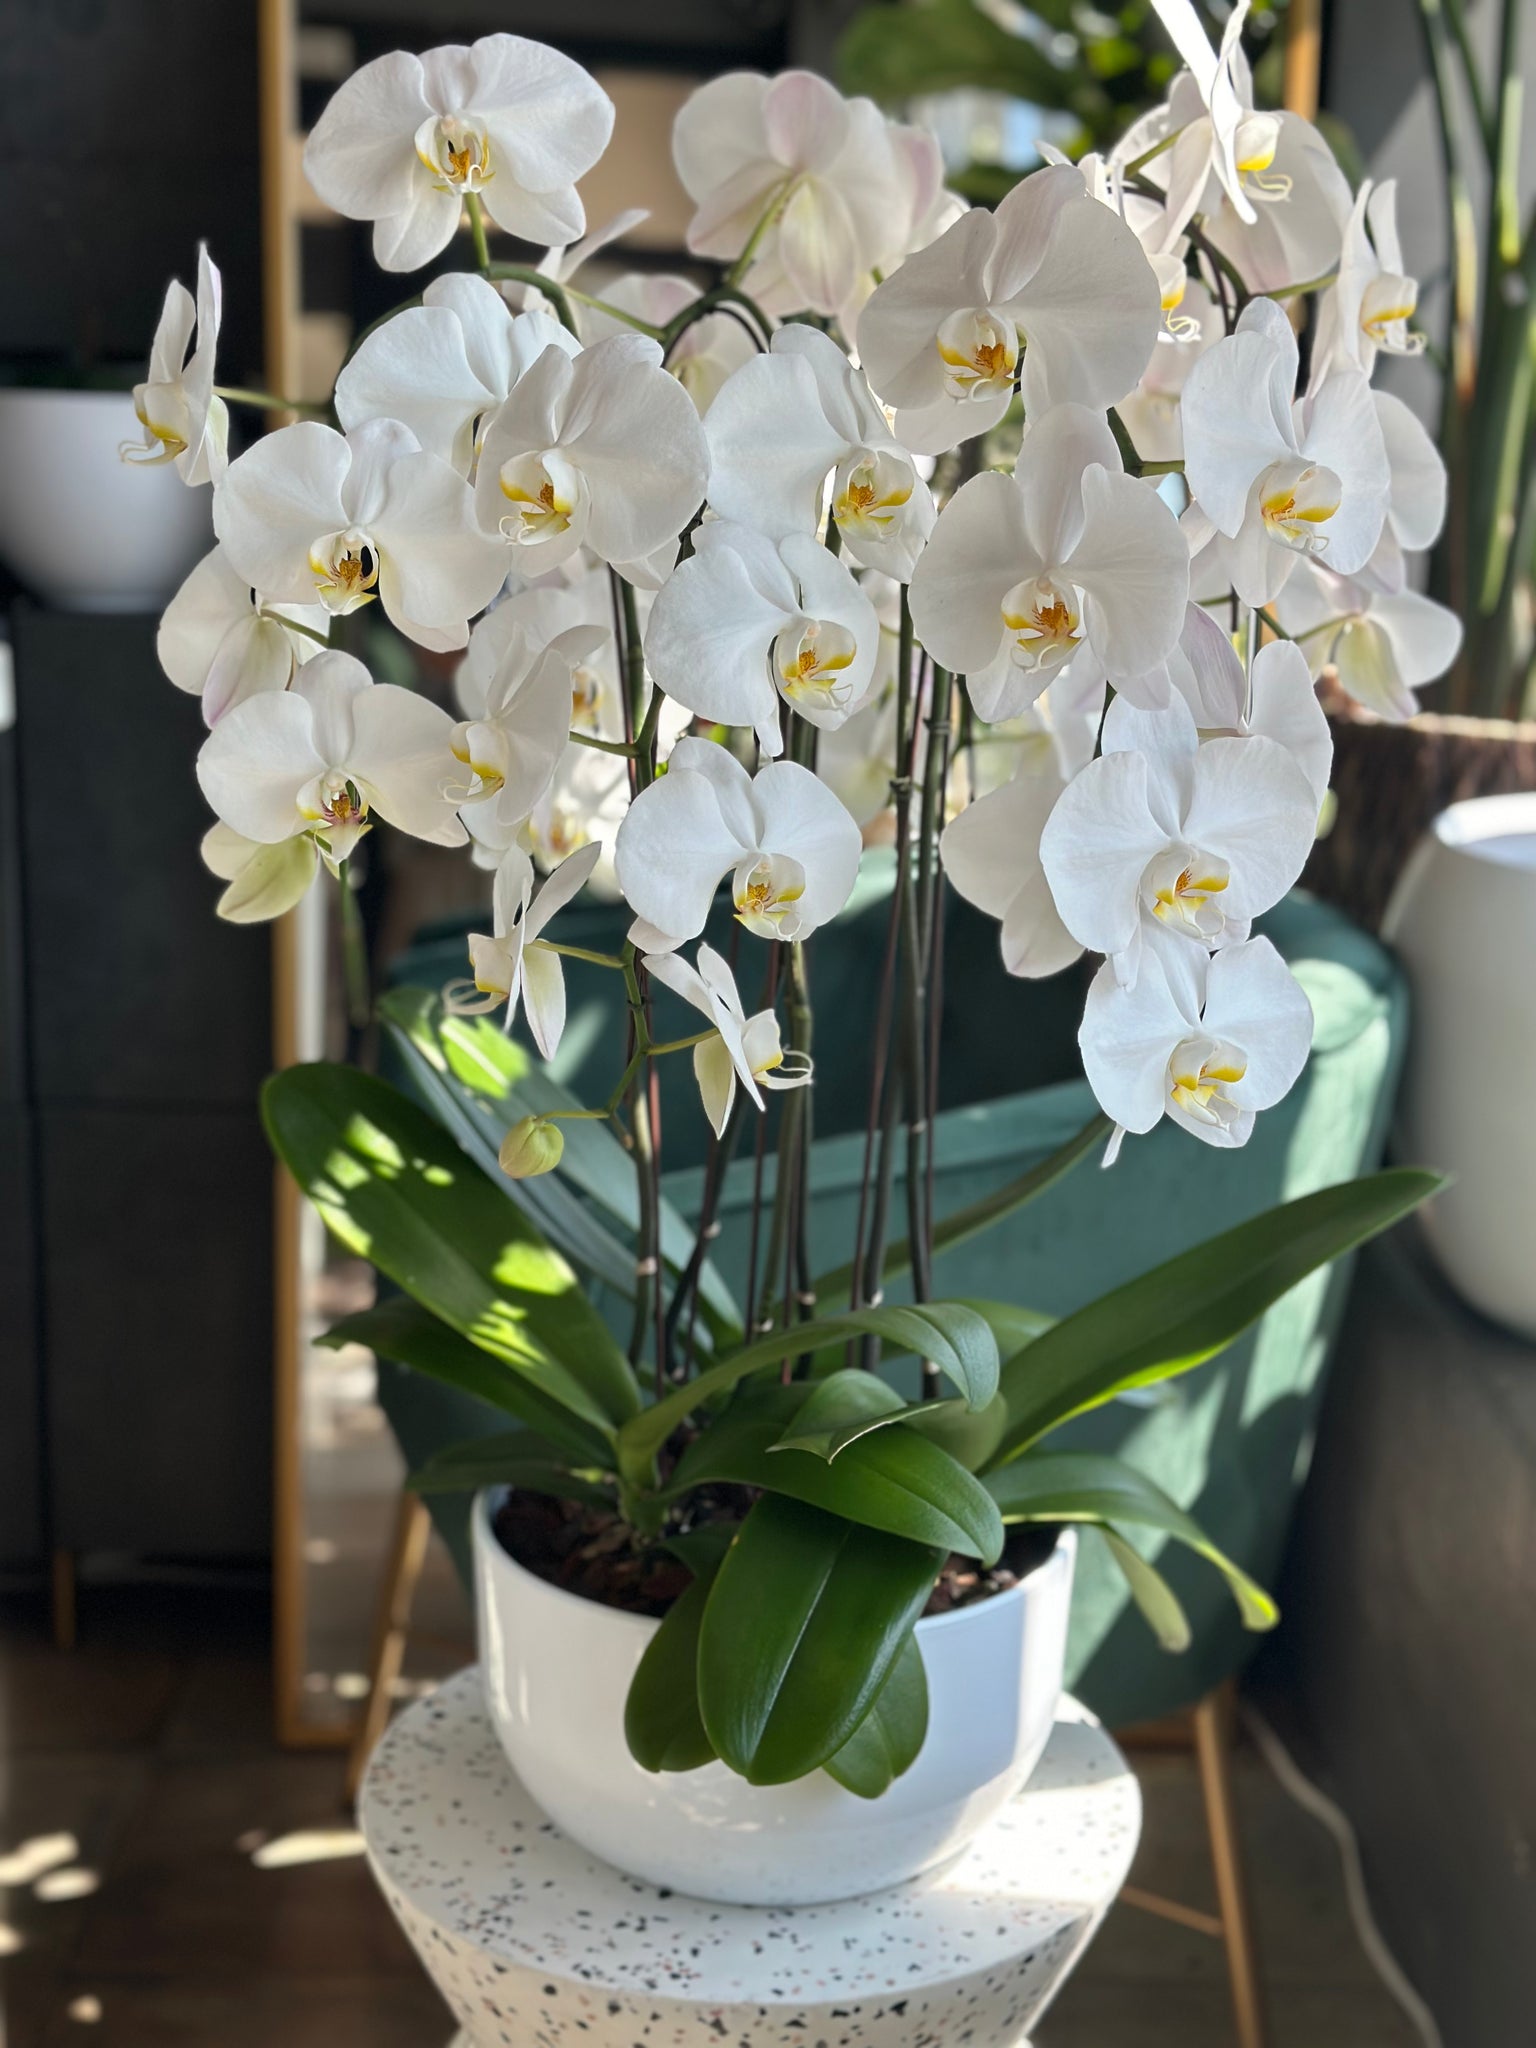 Giant orchids